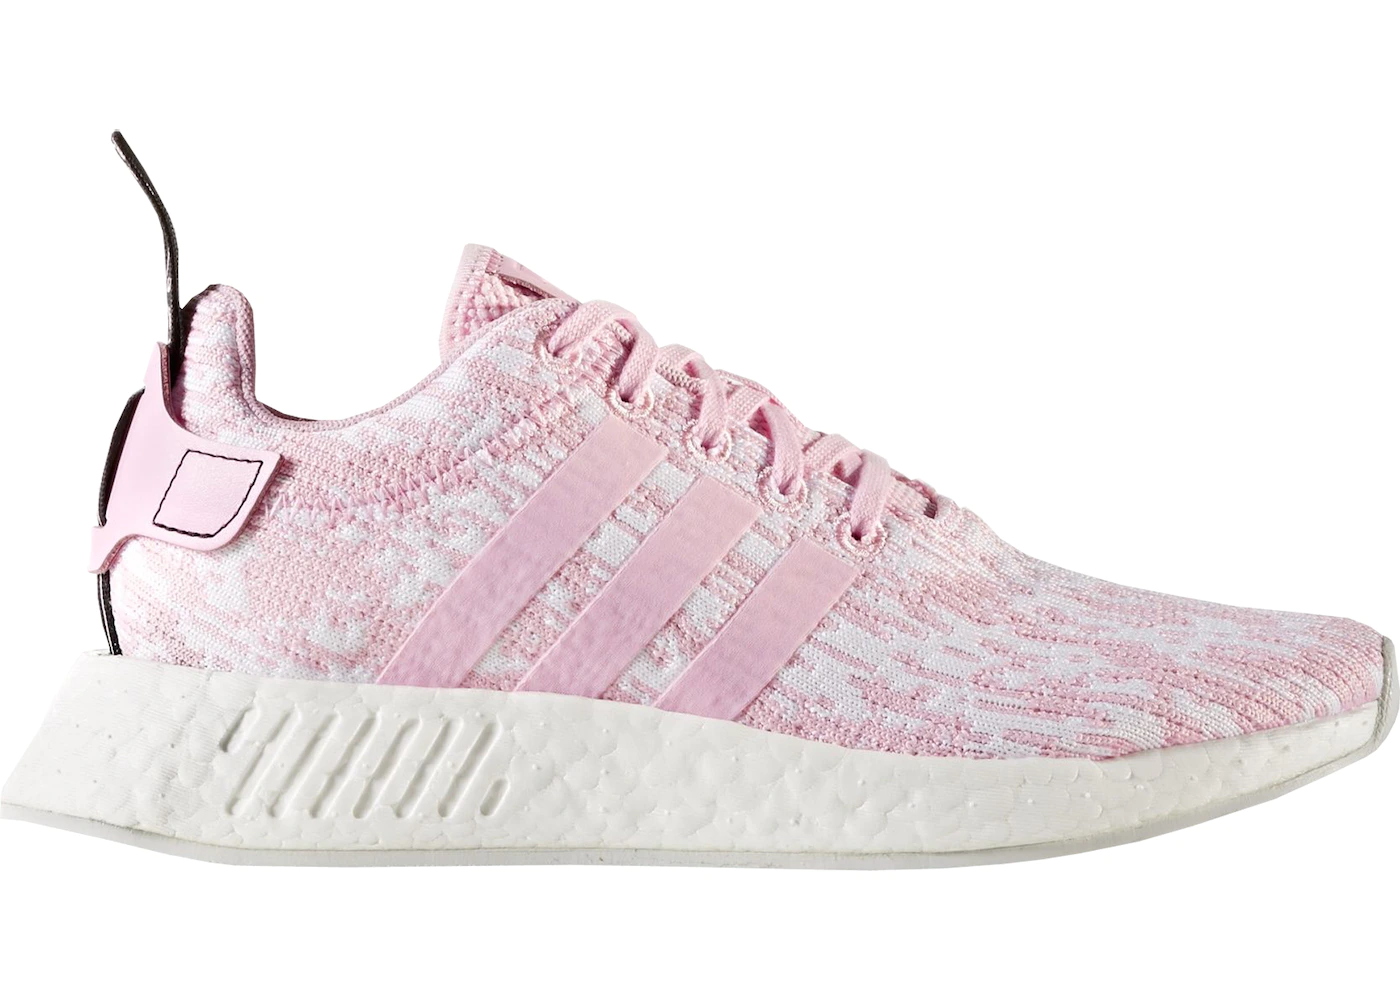 legal Outboard Lake Taupo adidas NMD R2 Wonder Pink (W) - BY9315 - US